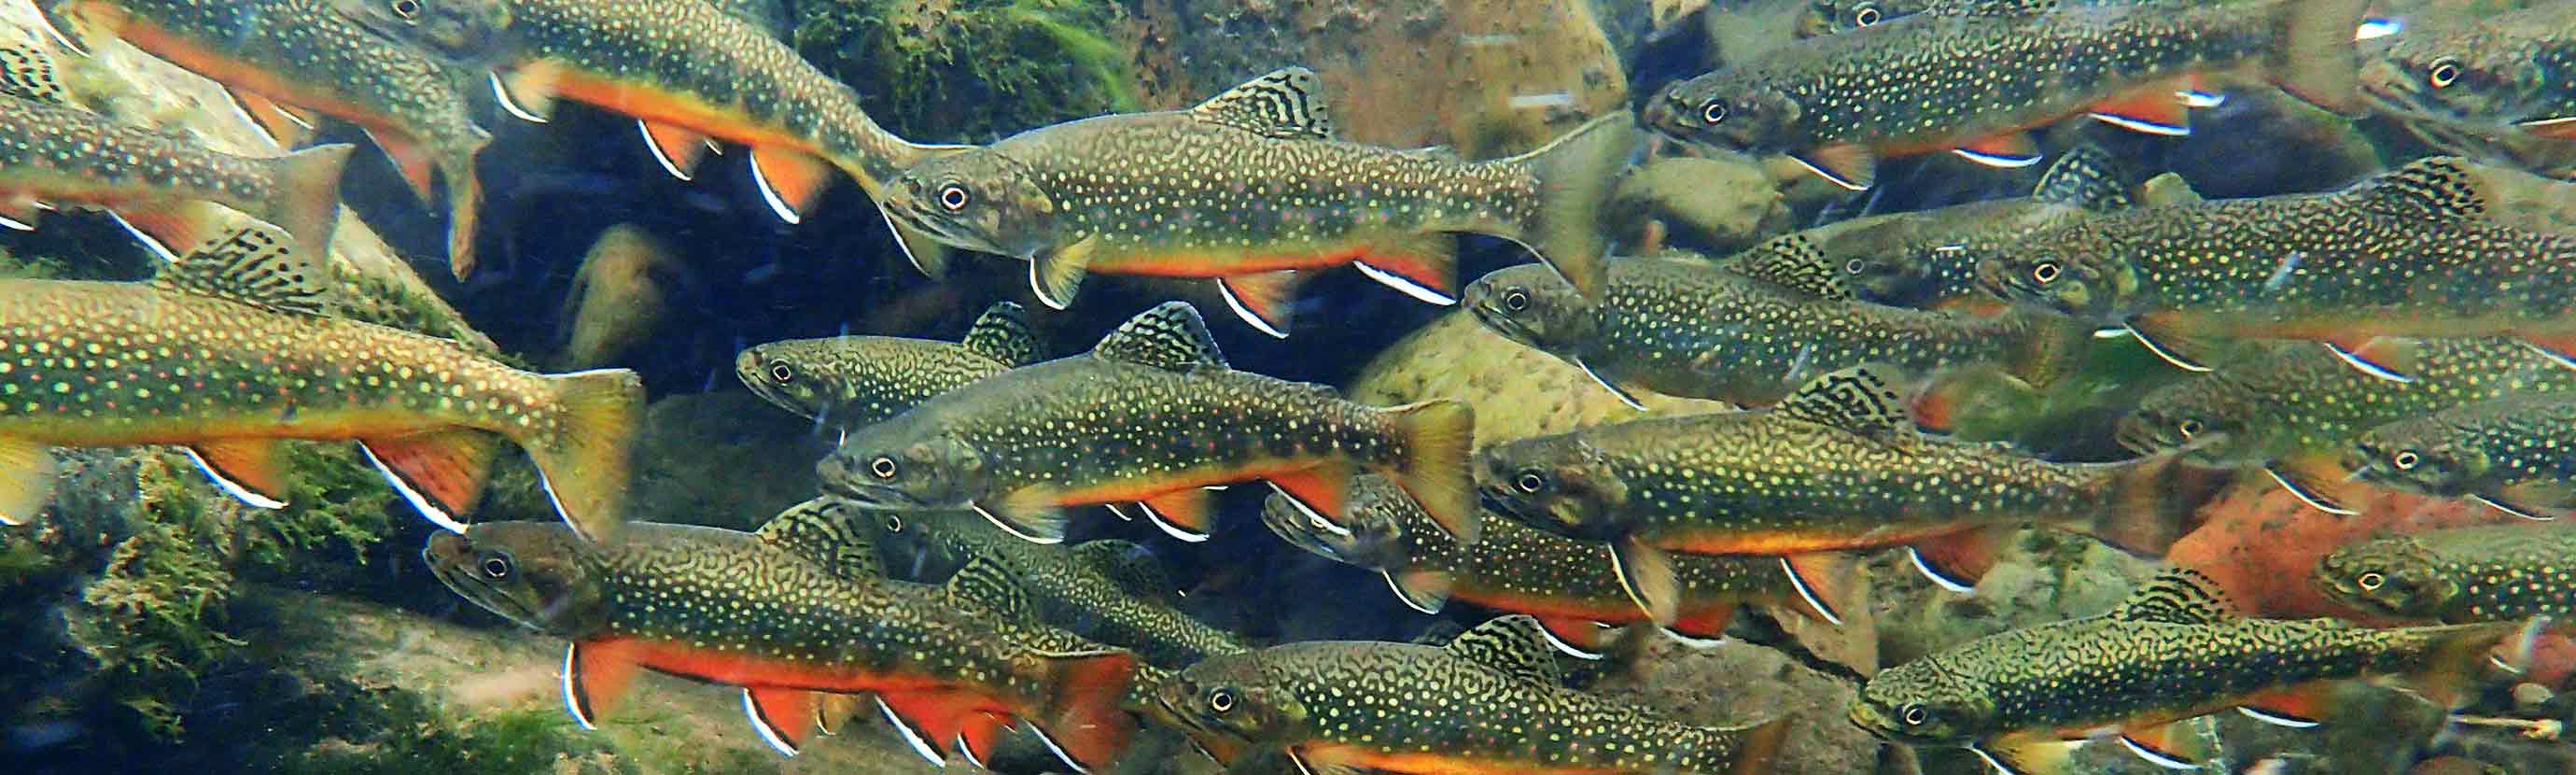 Brook Trout Schooling